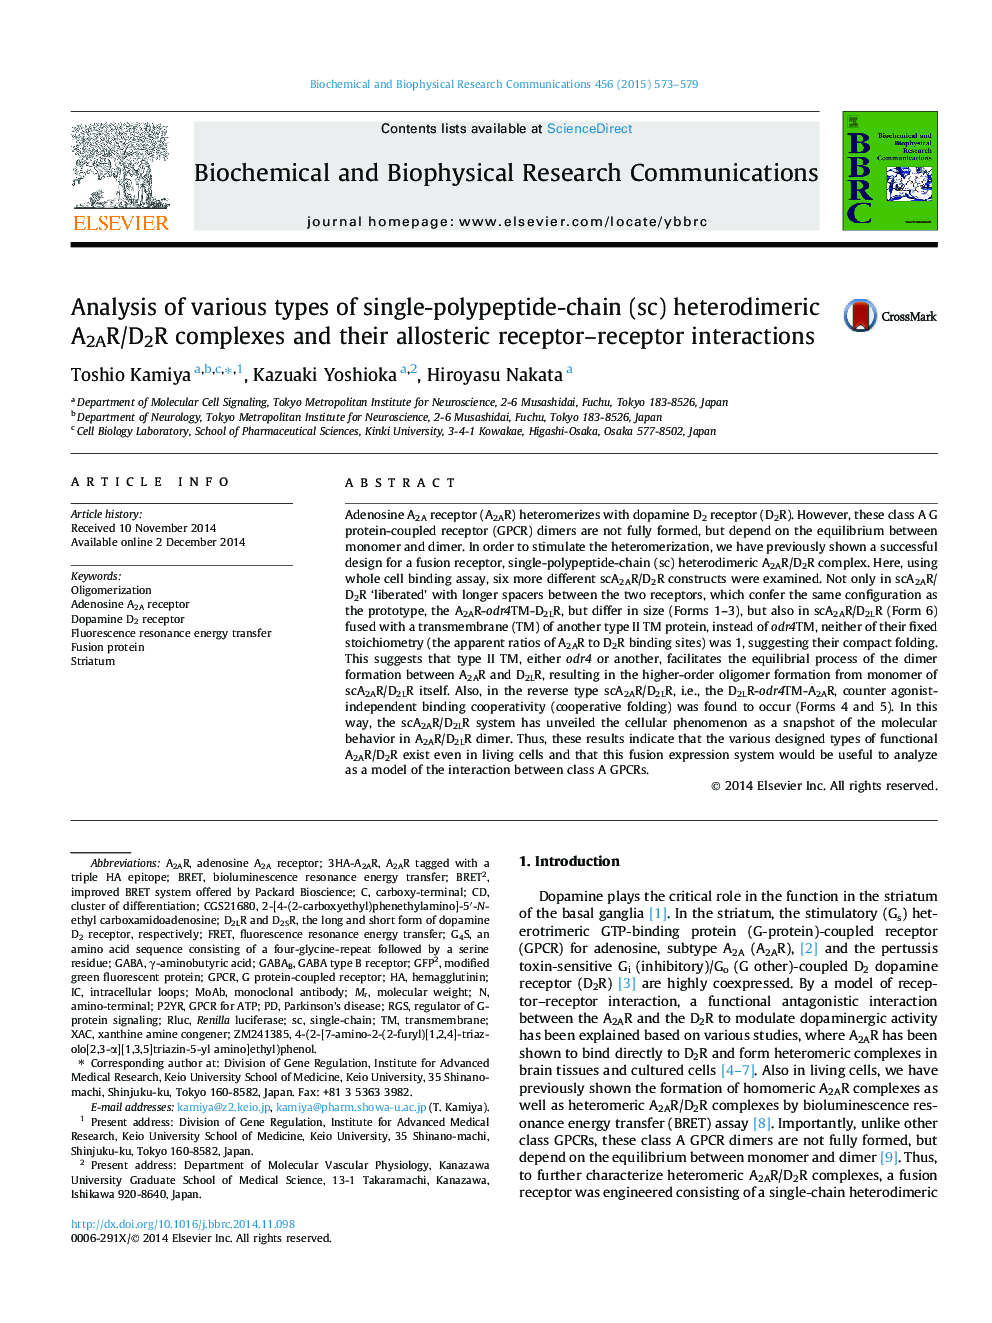 Analysis of various types of single-polypeptide-chain (sc) heterodimeric A2AR/D2R complexes and their allosteric receptor–receptor interactions